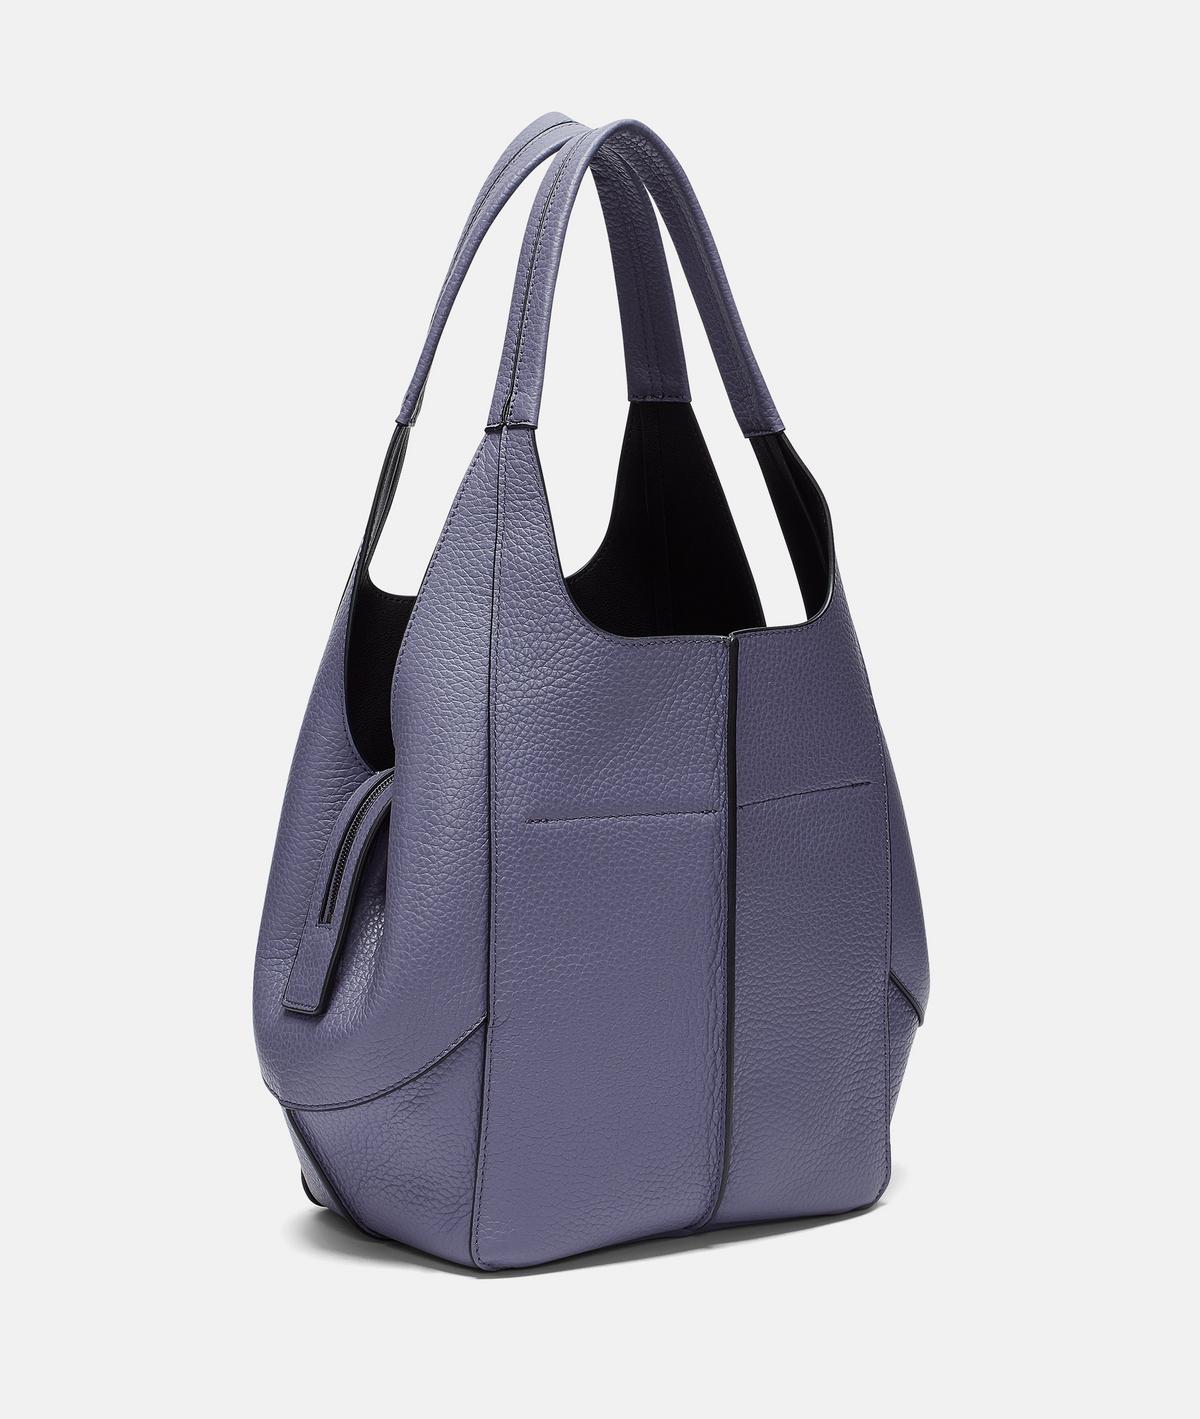 LIEBESKIND BERLIN Lilly Tote M